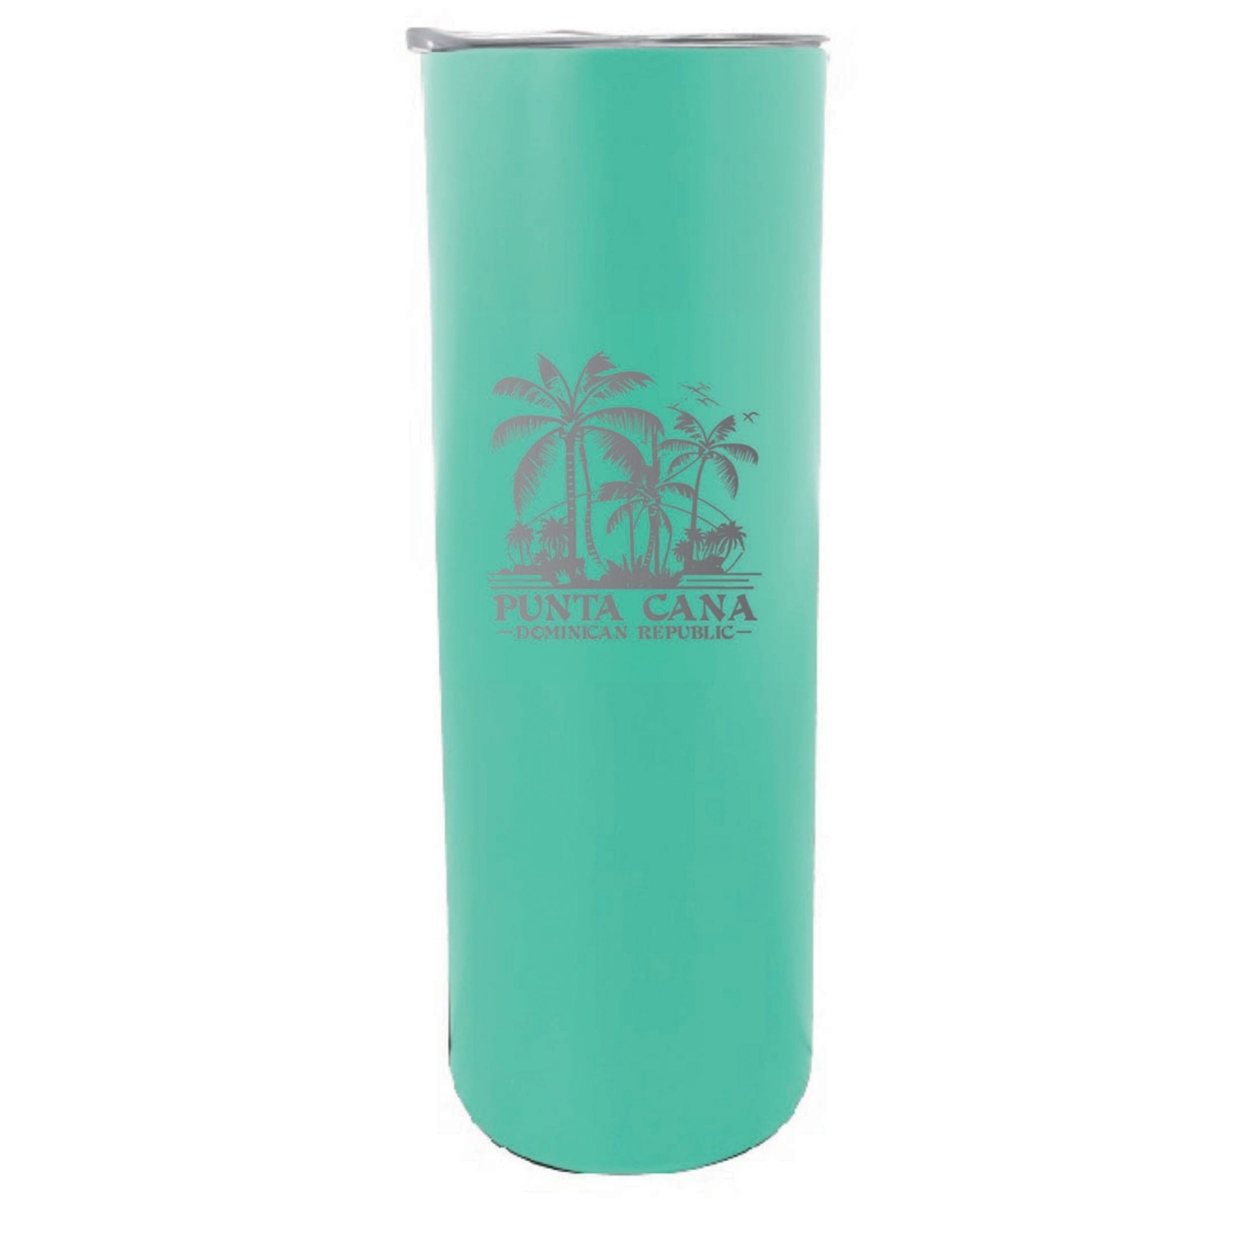 Punta Cana Dominican Republic Souvenir 20 Oz Insulated Stainless Steel Skinny Tumbler Etched - Rainbow Glitter Gray, PALM BEACH